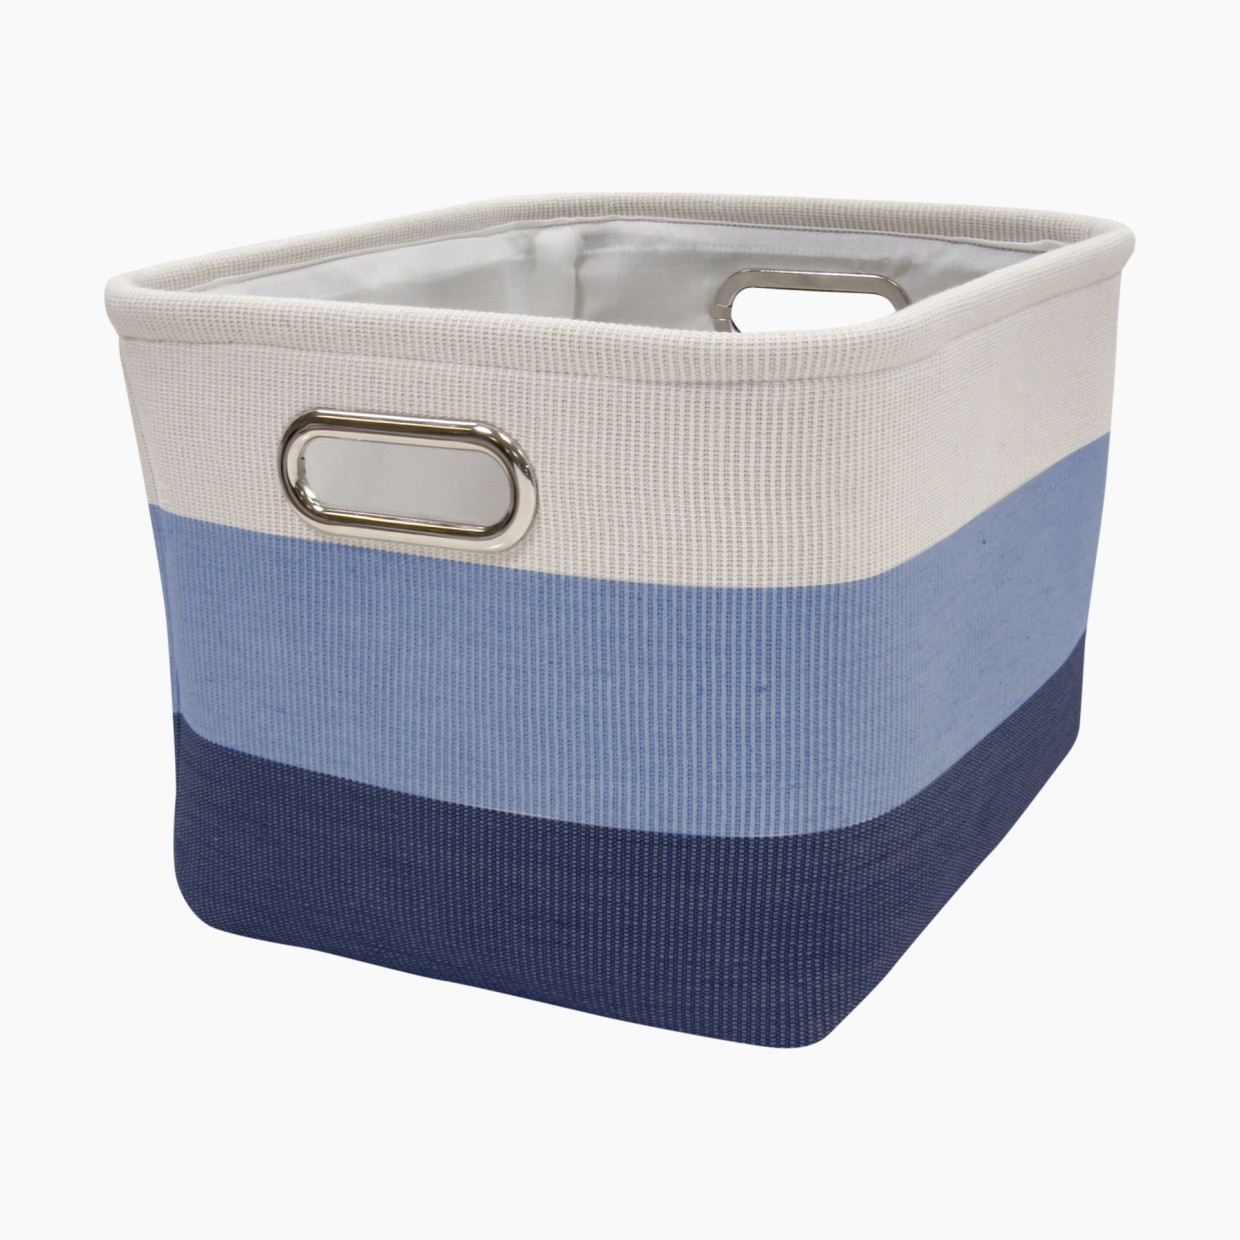 Lambs & Ivy Ombre Storage - Blue.